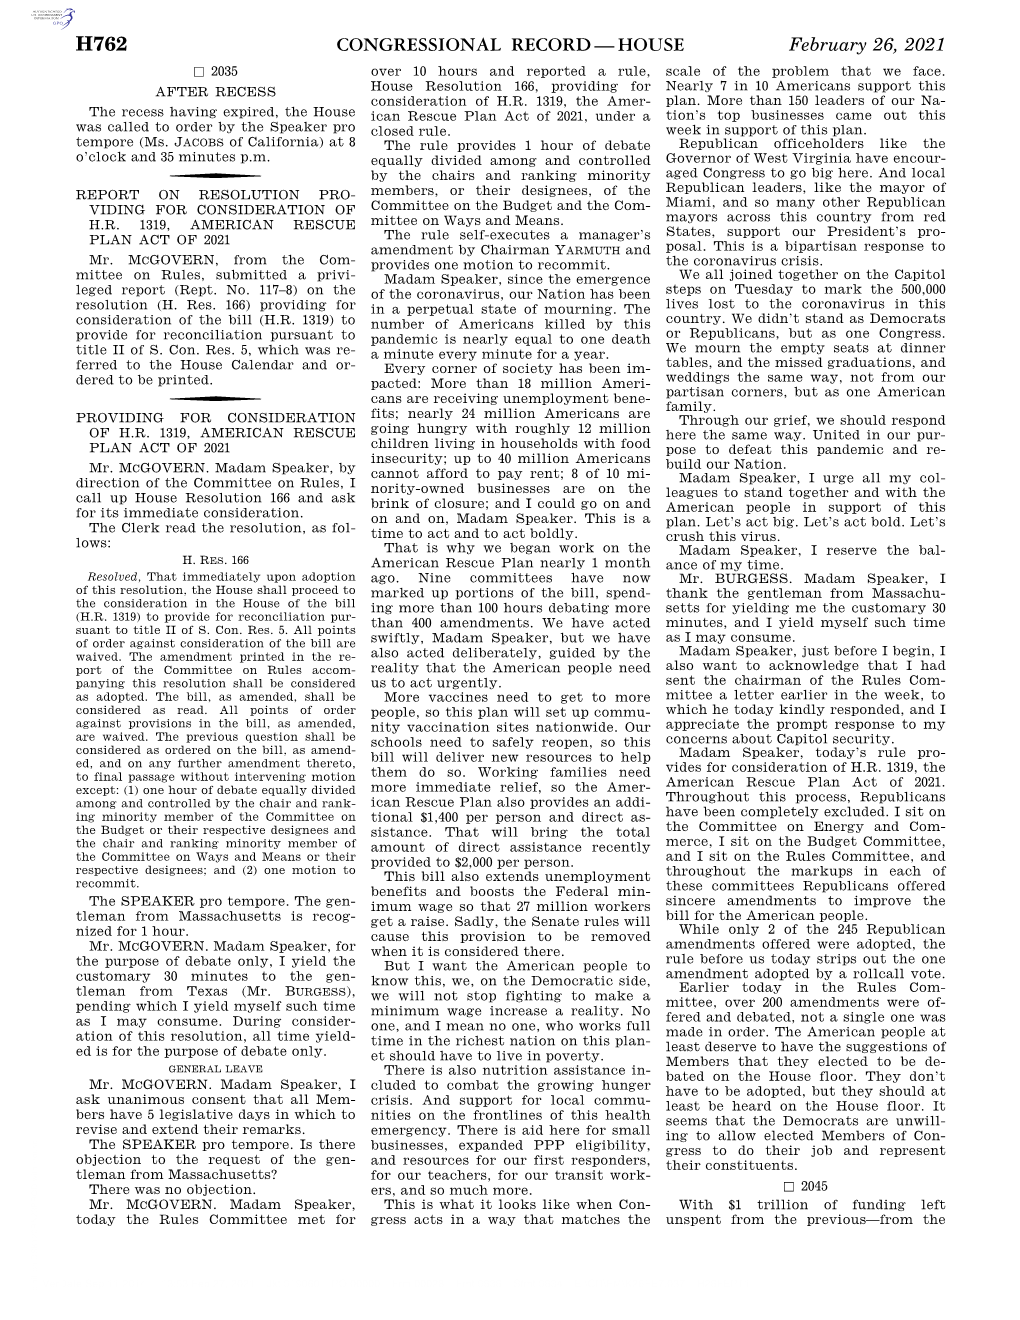 Congressional Record—House H762